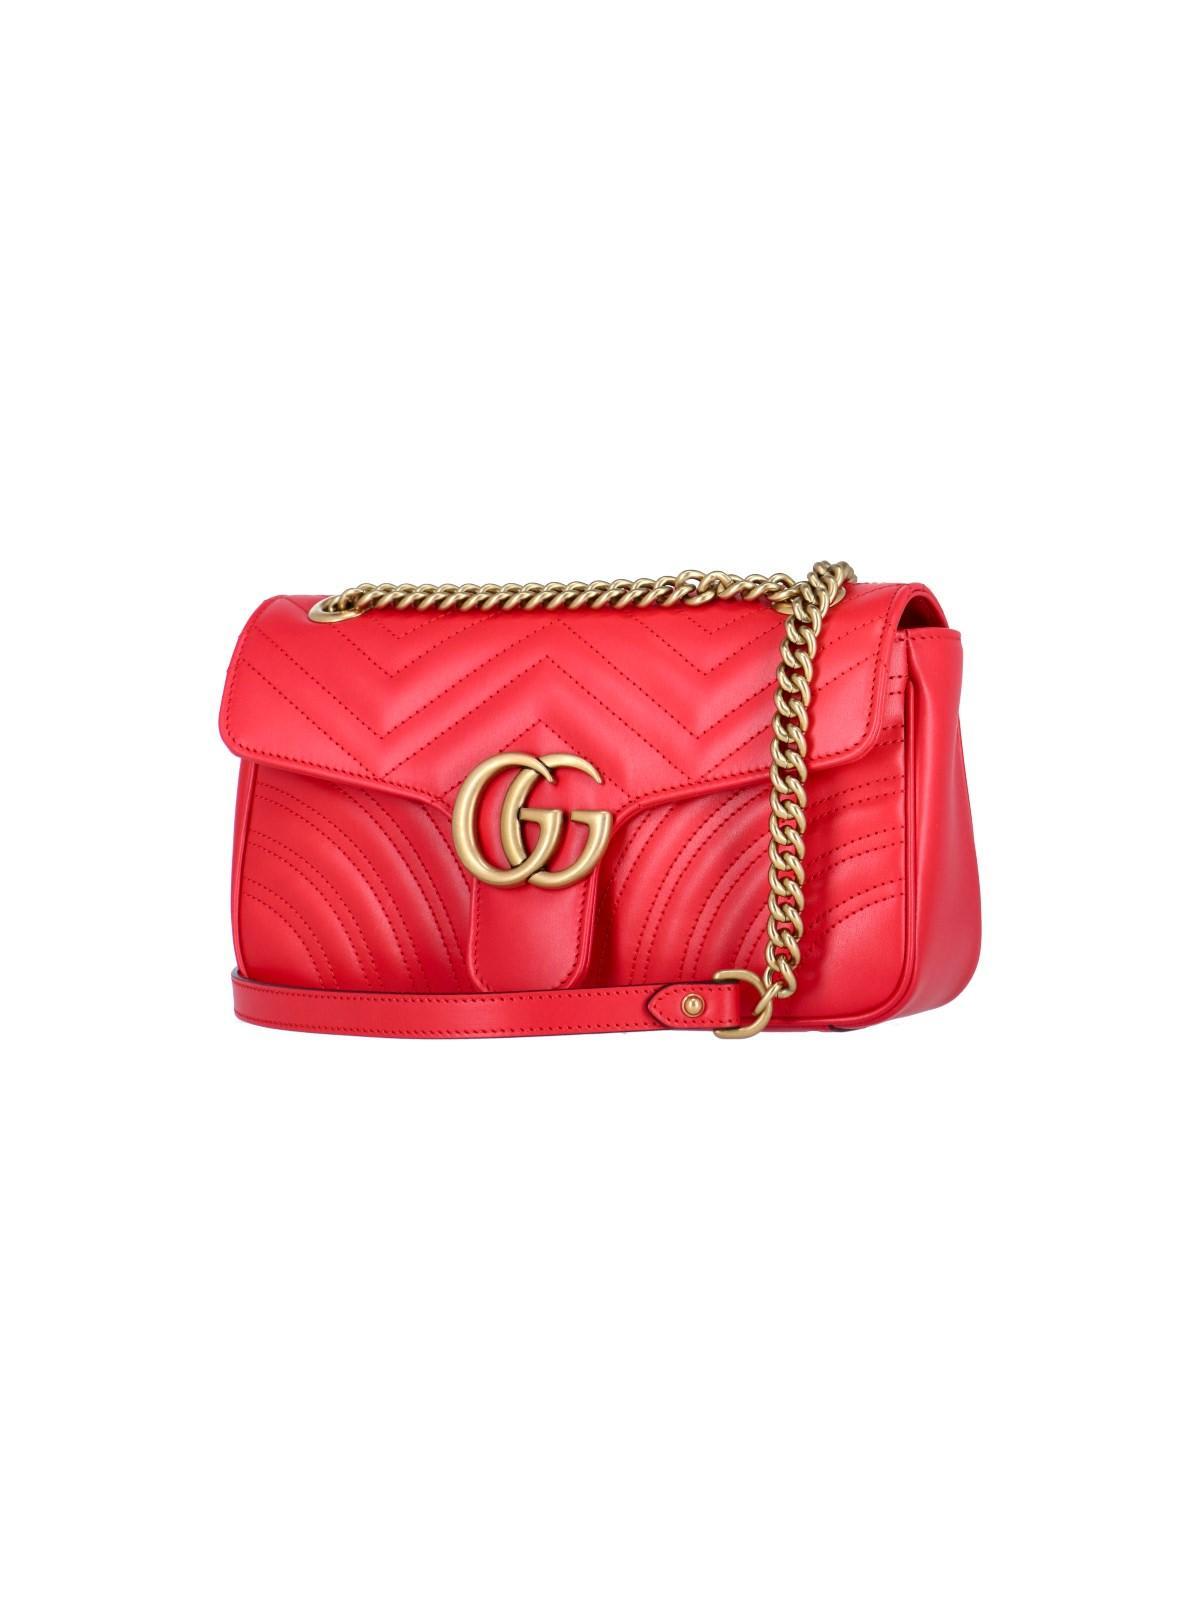 GG Marmont Small Shoulder Bag in Red - Gucci